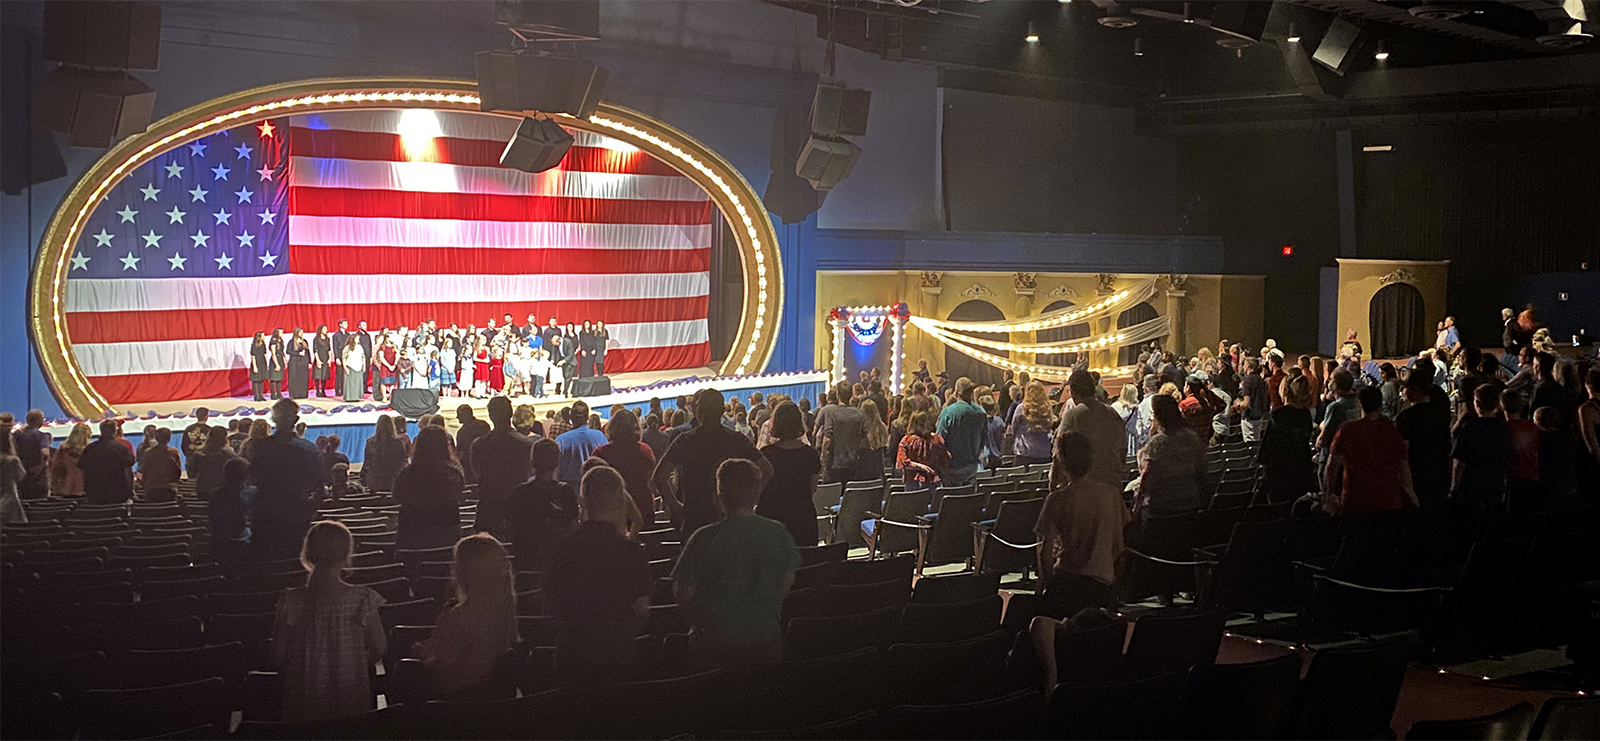 People attend a show at the Freedom Encounter in Branson, Mo. Photo courtesy of Freedom Encounter